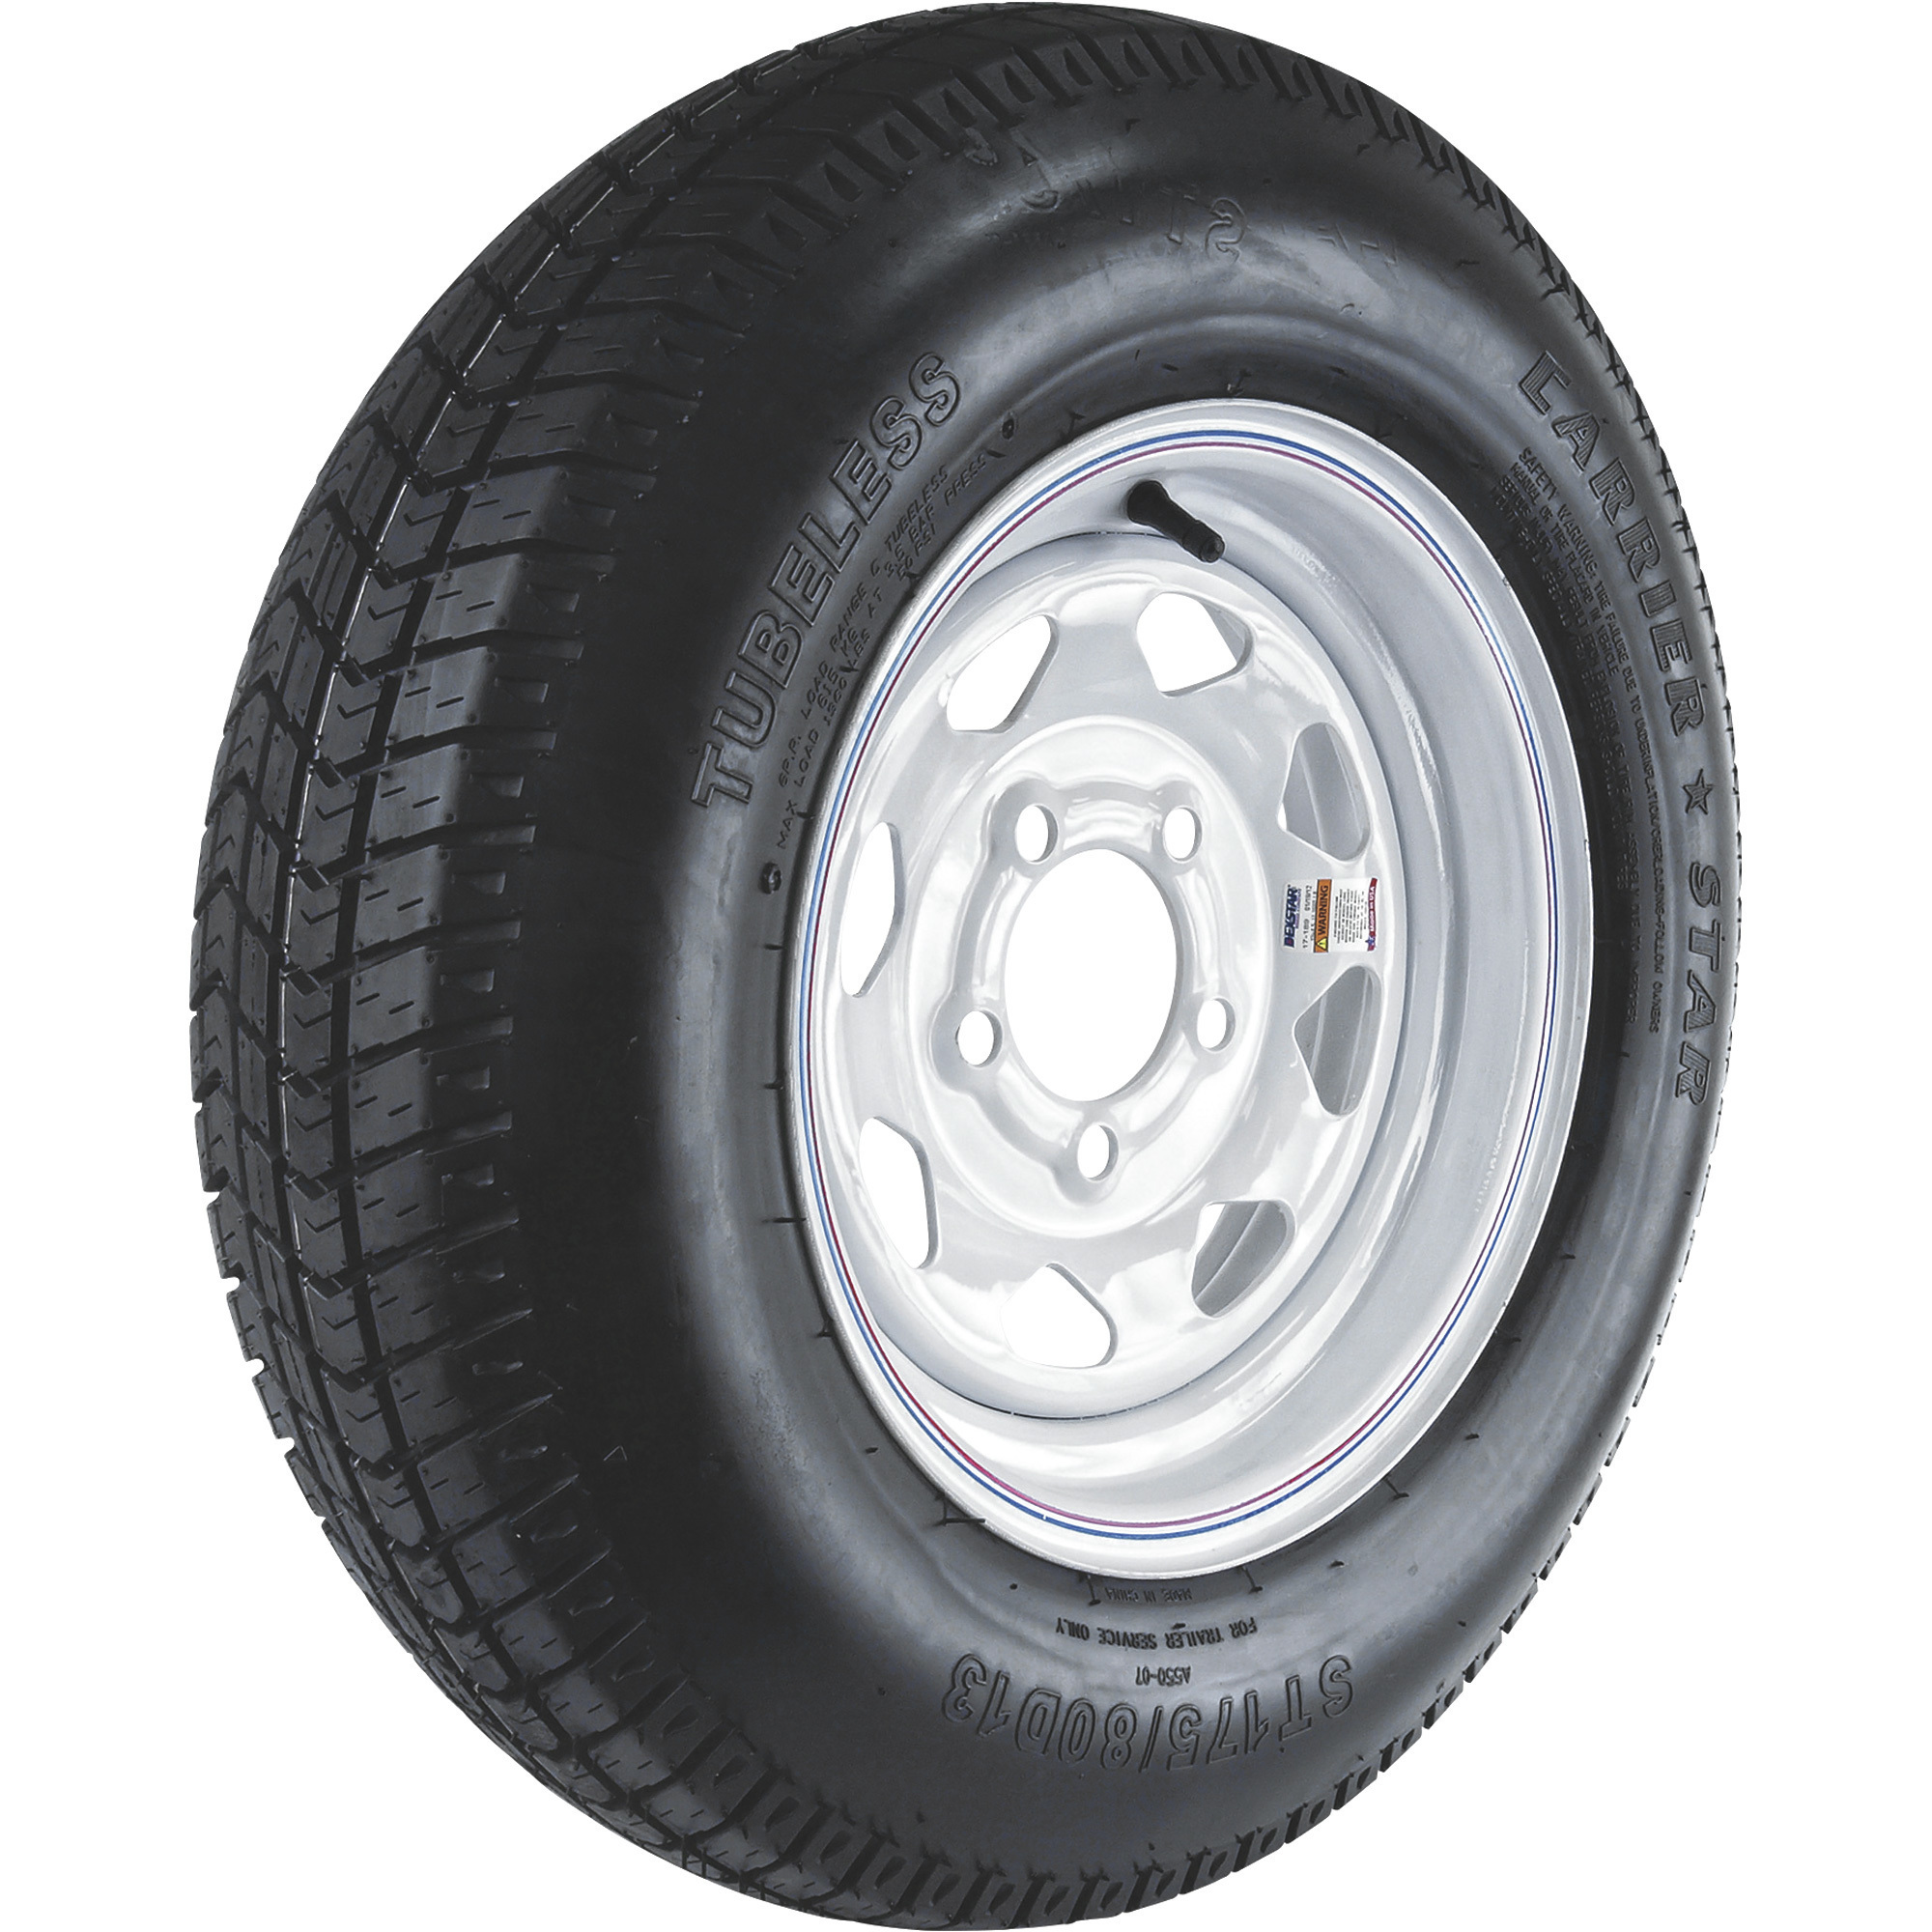 Kenda Karrier 13Inch Radial Trailer Tire and Wheel Assembly â ST175/80R-13, 5-Hole, Load Range C, Model DM175R3C-5CI